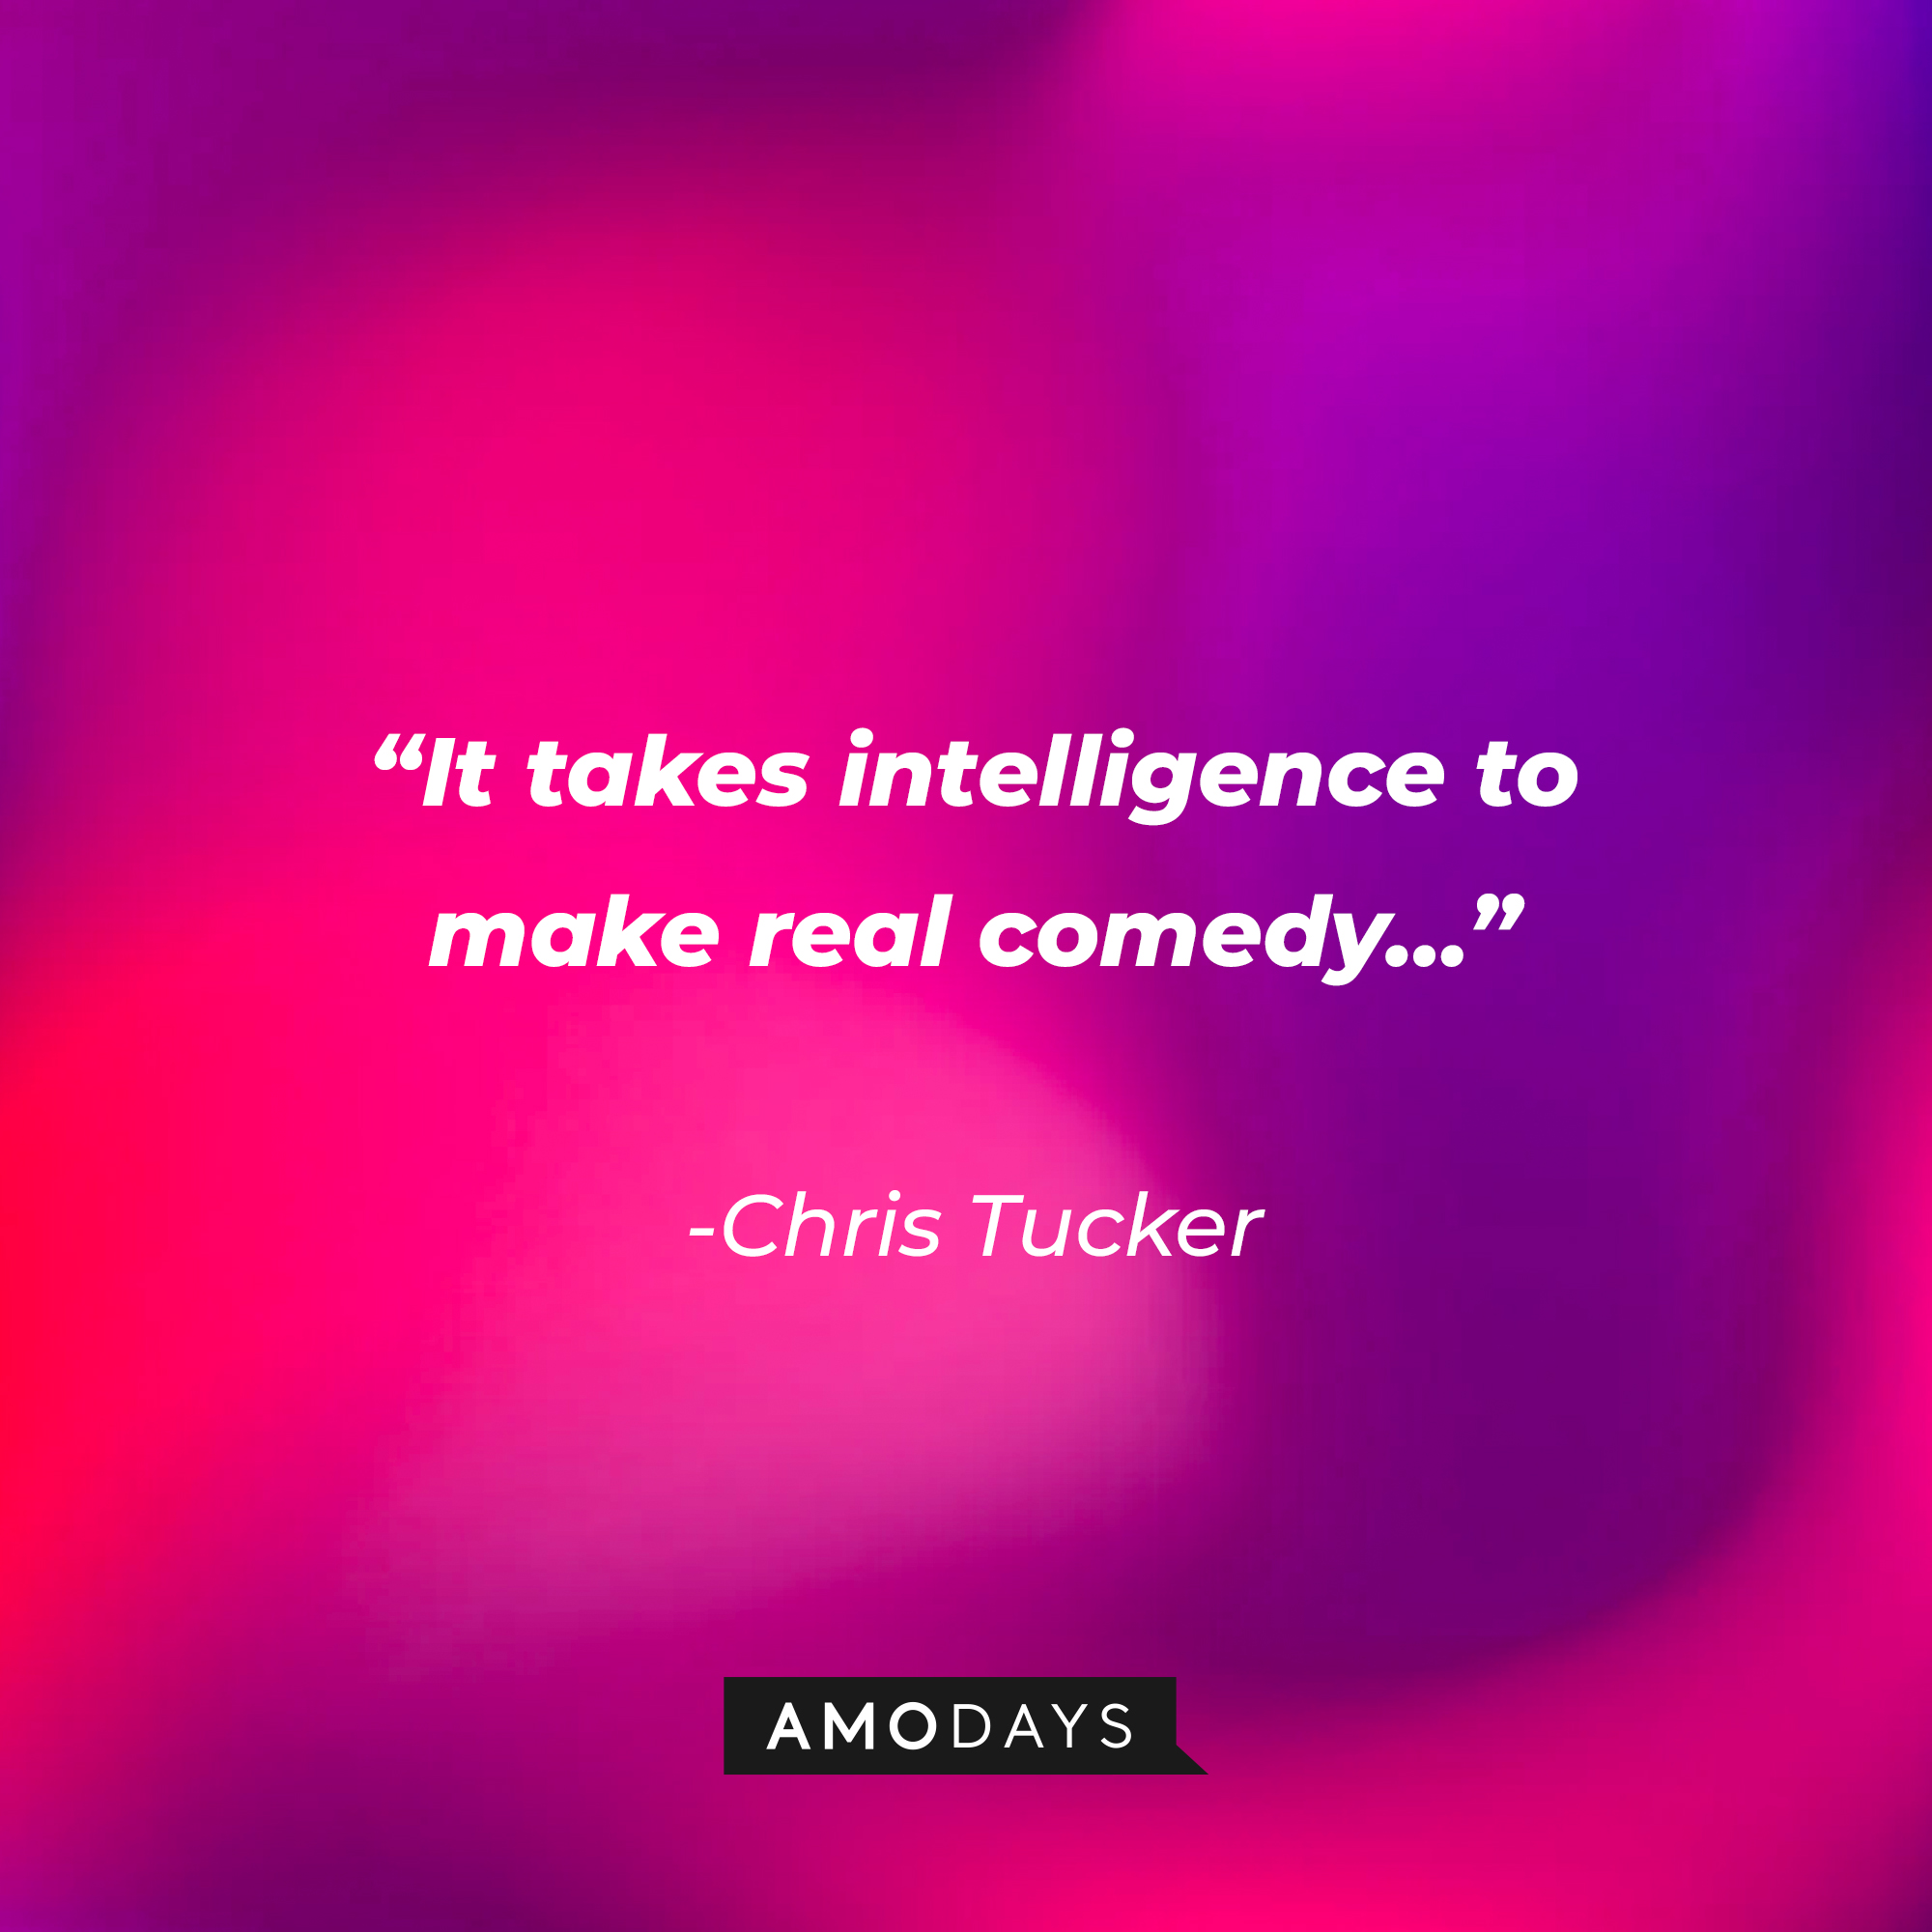 Chris Tucker’s quote: “It takes intelligence to make real comedy…”┃Source: AmoDays